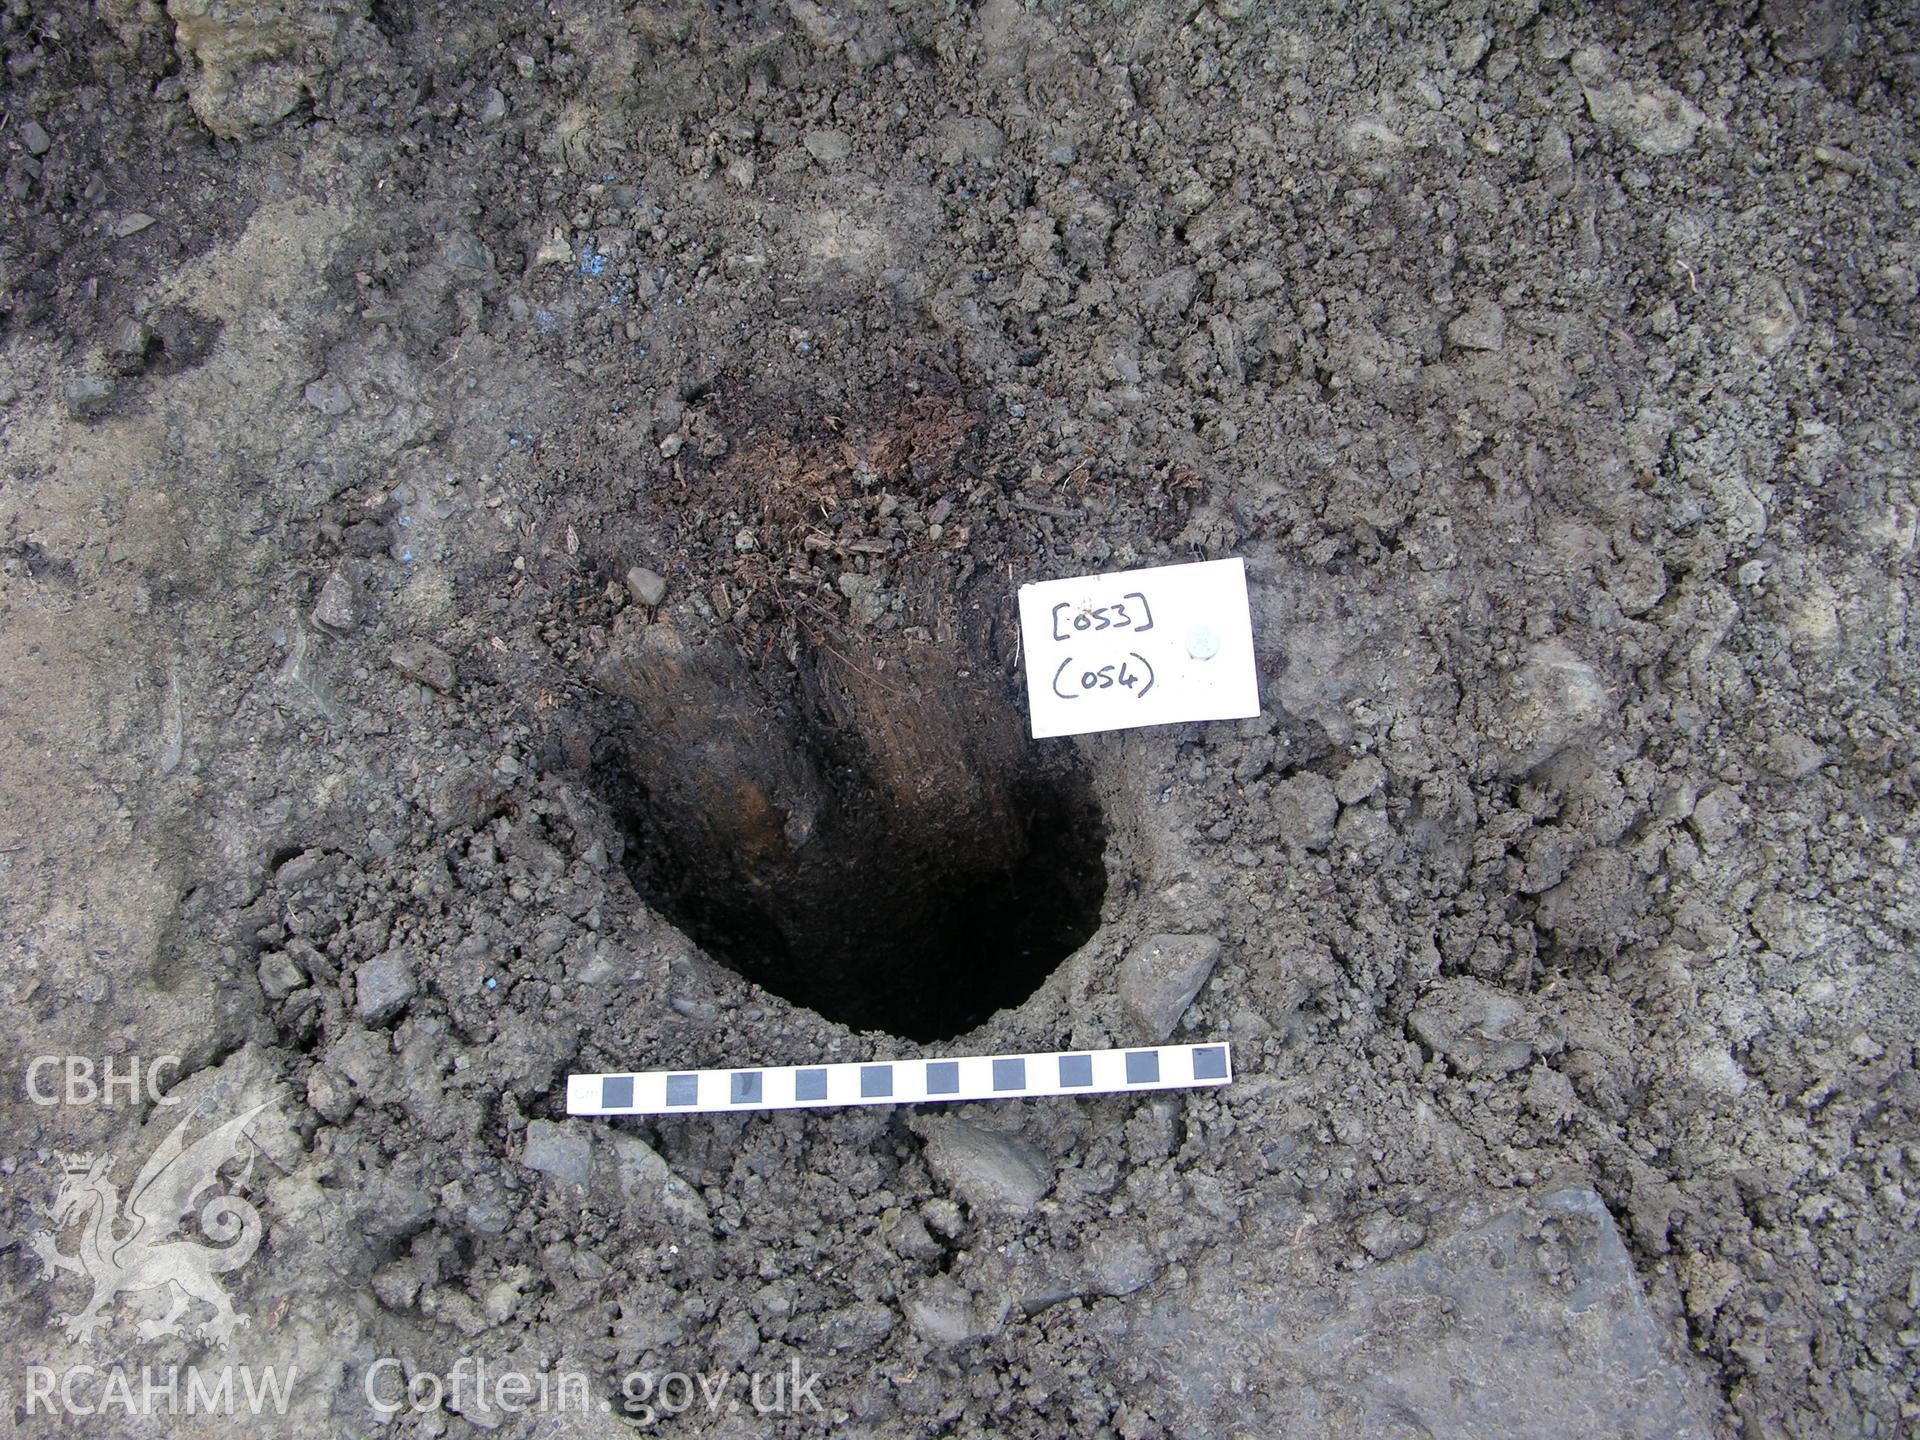 Colour digital photograph showing view of posthole with post - part of the Archaeological Excavation report for Horse Yard Farm, Evenjobb (CAP Report 607) by Chris E Smith, from a Cambrian Archaeological Projects assessment survey.